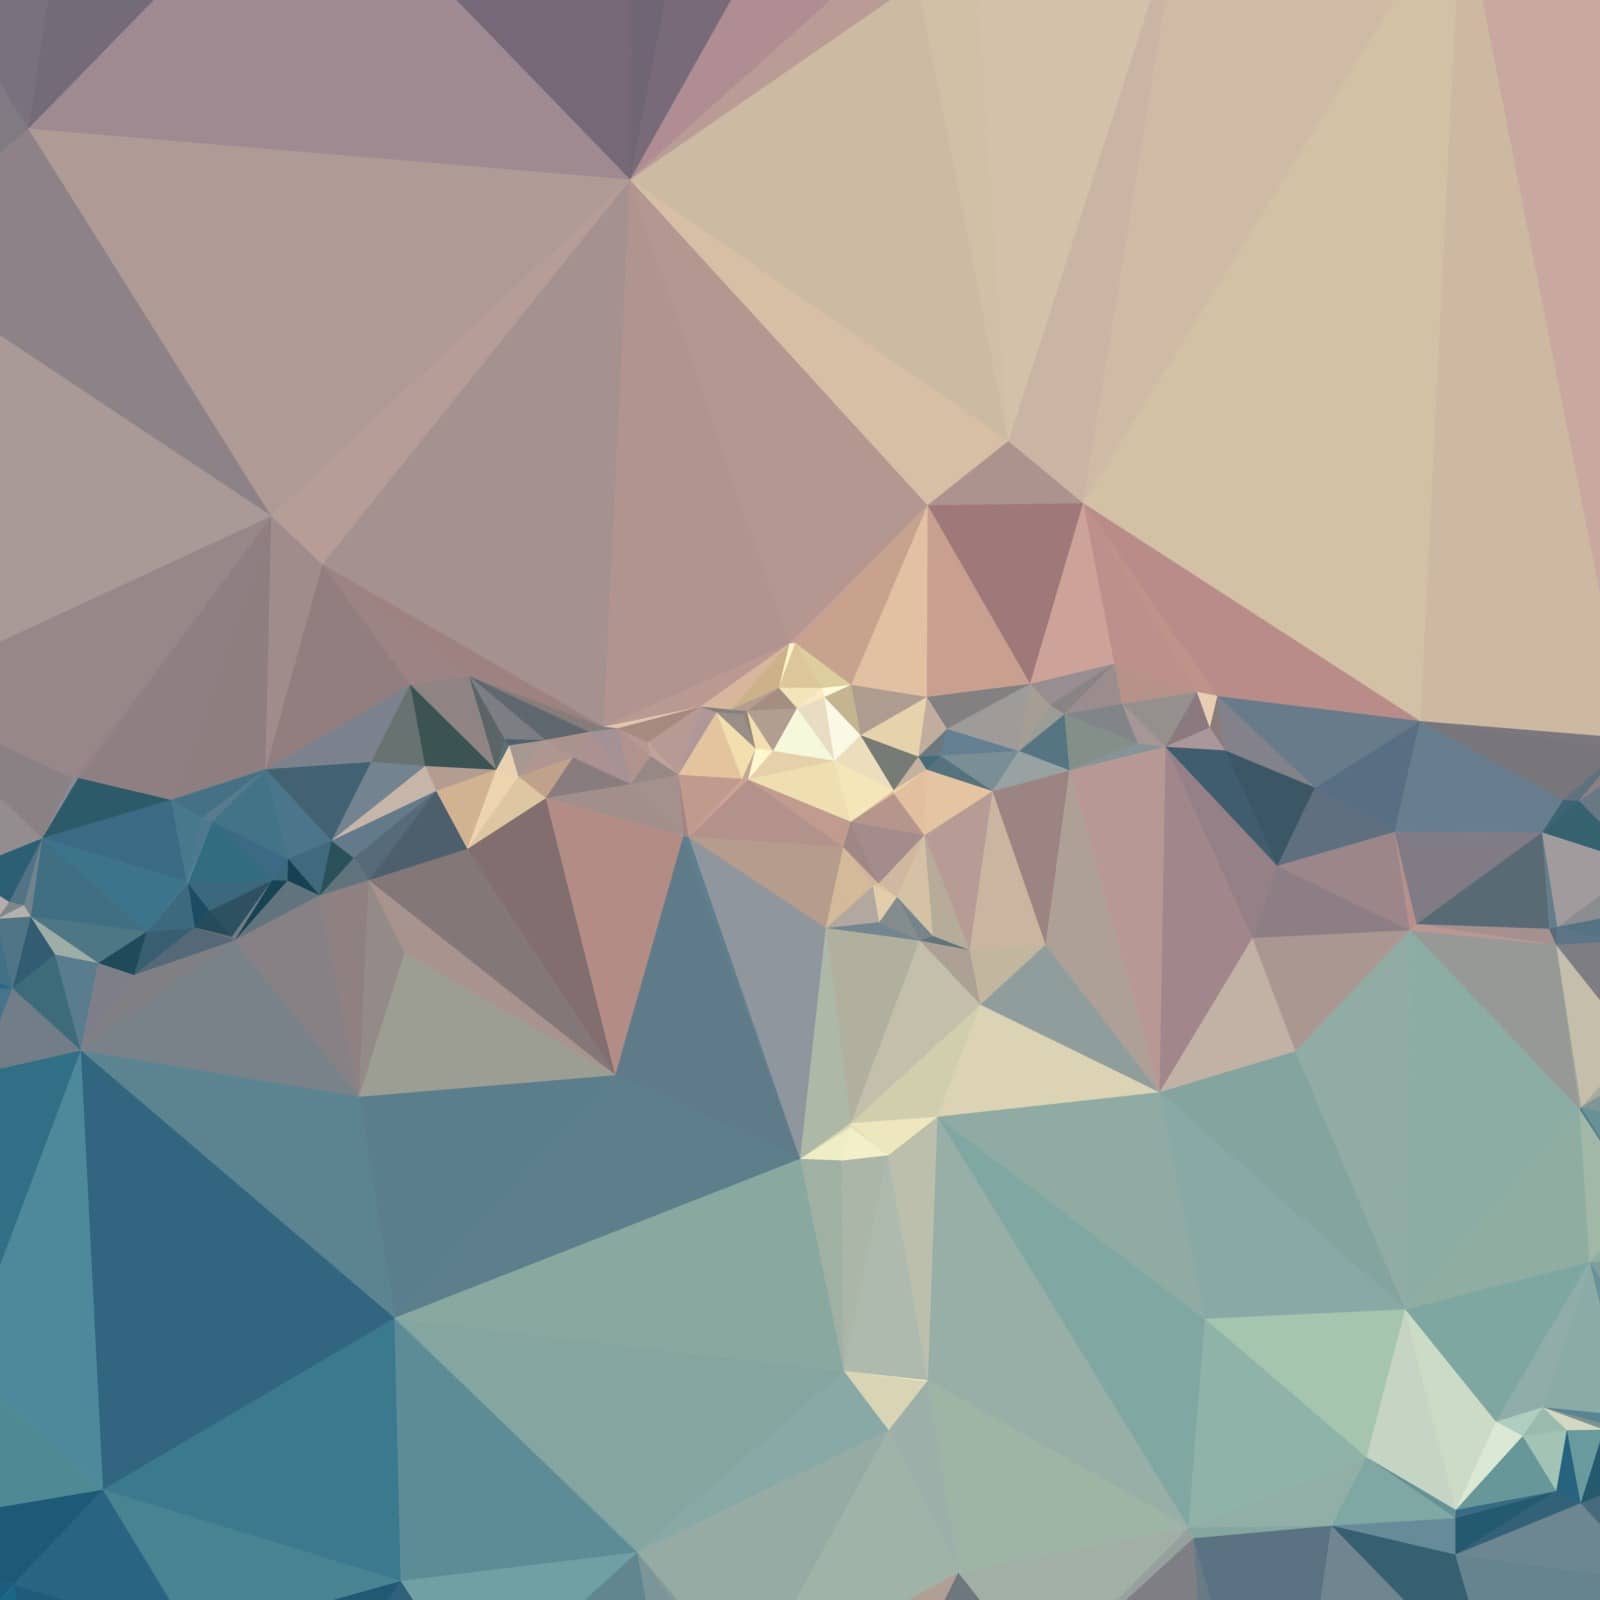 Low polygon style illustration of opera mauve abstract geometric background.